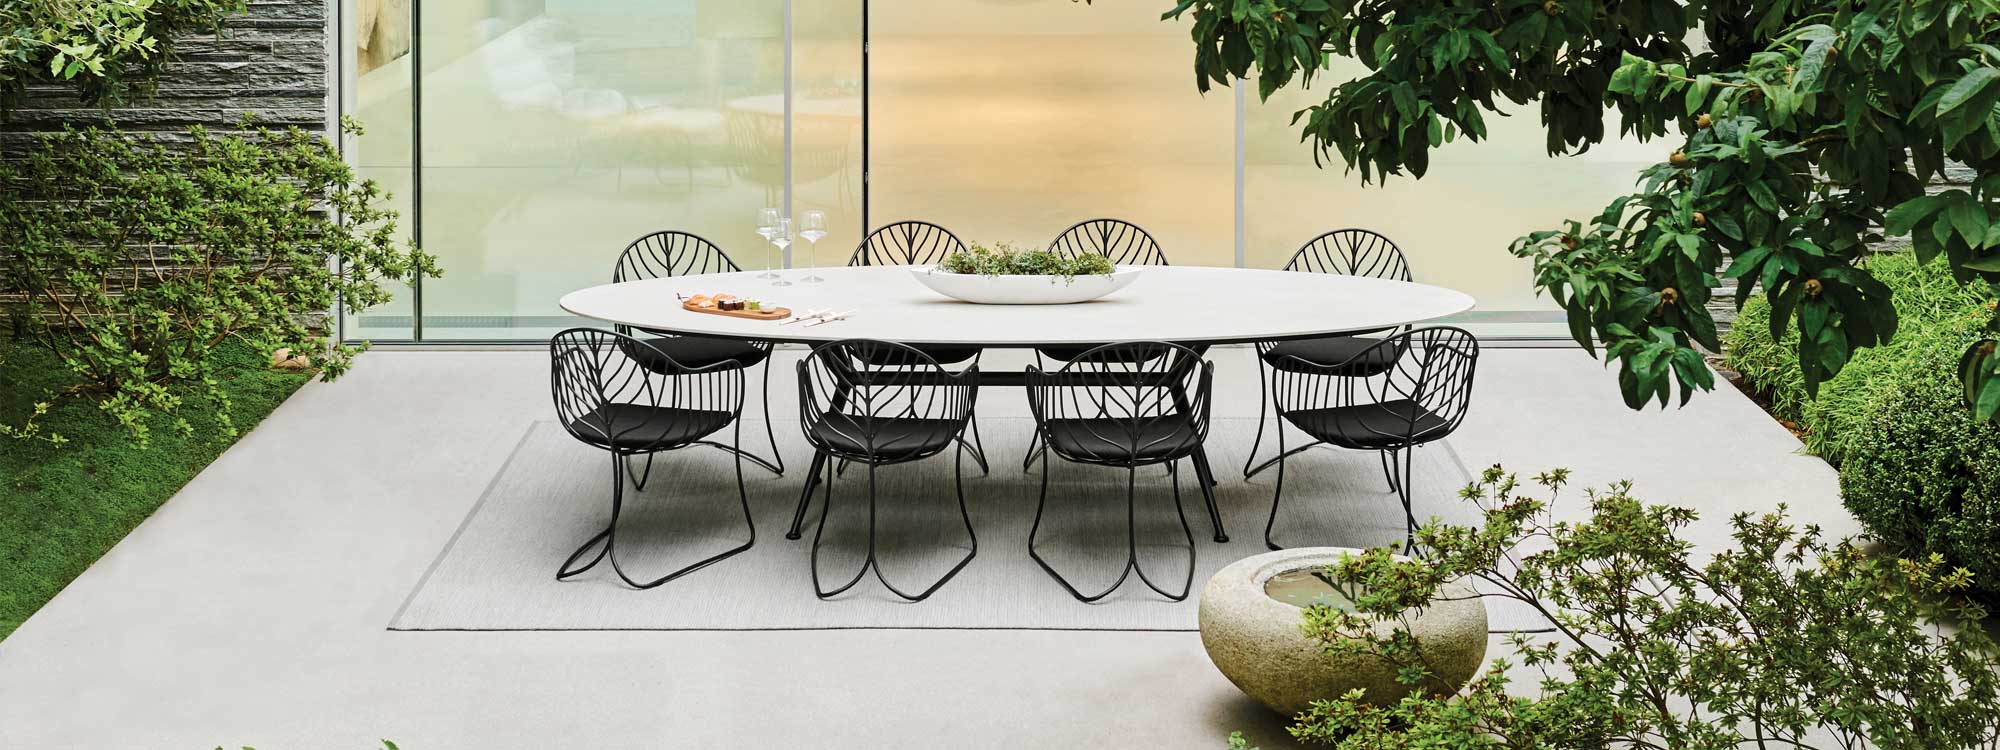 Exes & Folia dining set , organically inspired outdoor chairs & unique circular garden dining table by Royal Botania luxury garden furniture